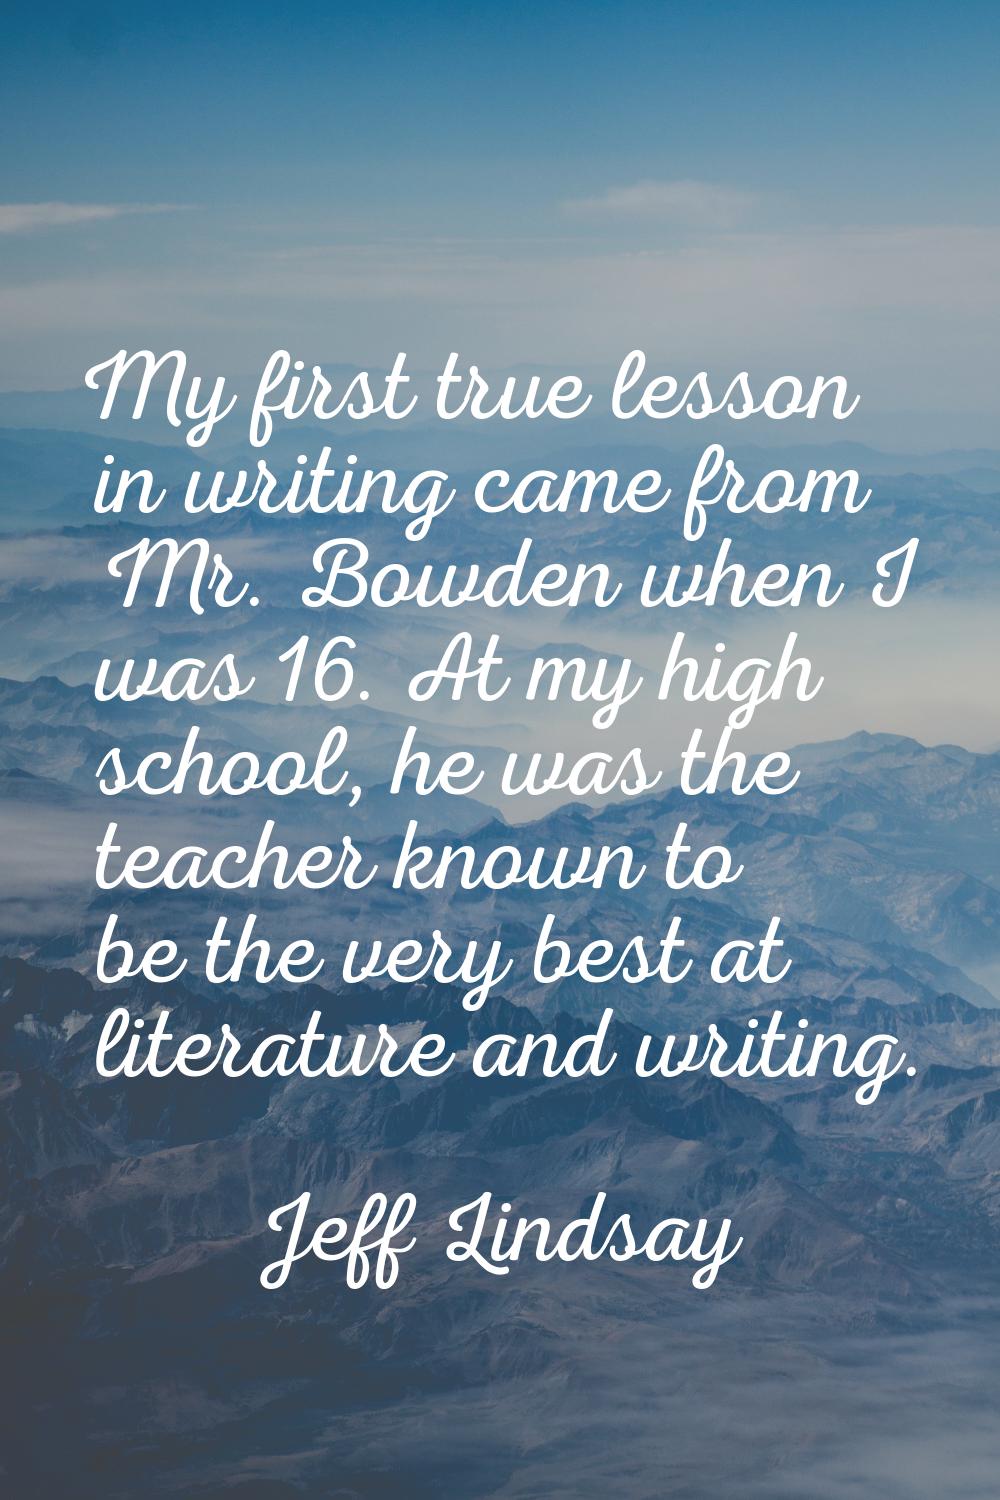 My first true lesson in writing came from Mr. Bowden when I was 16. At my high school, he was the t